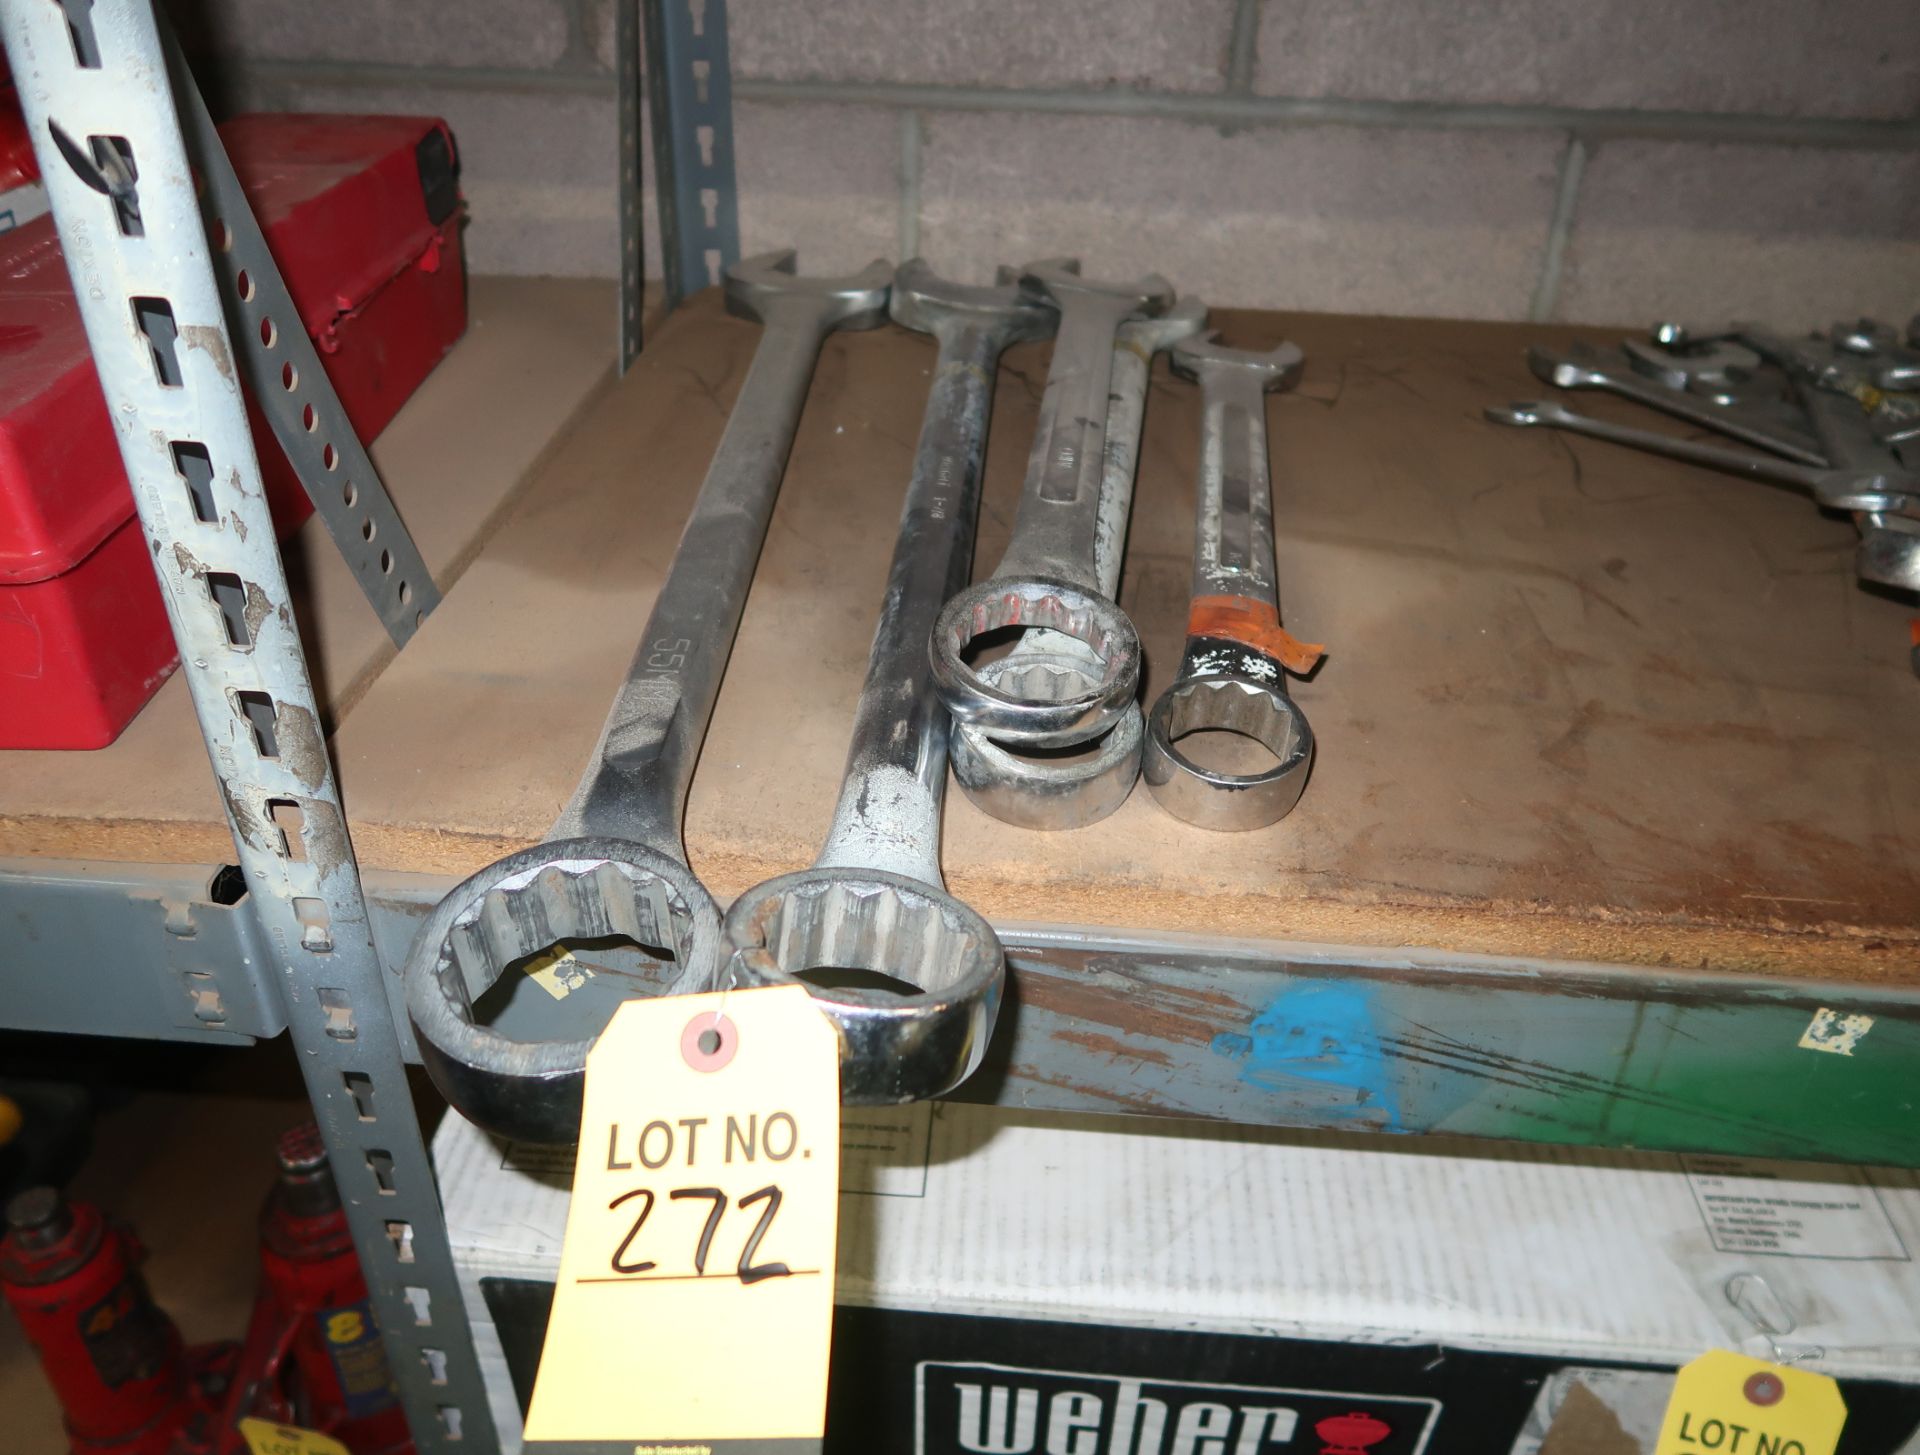 5 LARGE WRENCHES- 55MM, 1 7/8", 1 13/16", 1 5/8", 1 1/2"